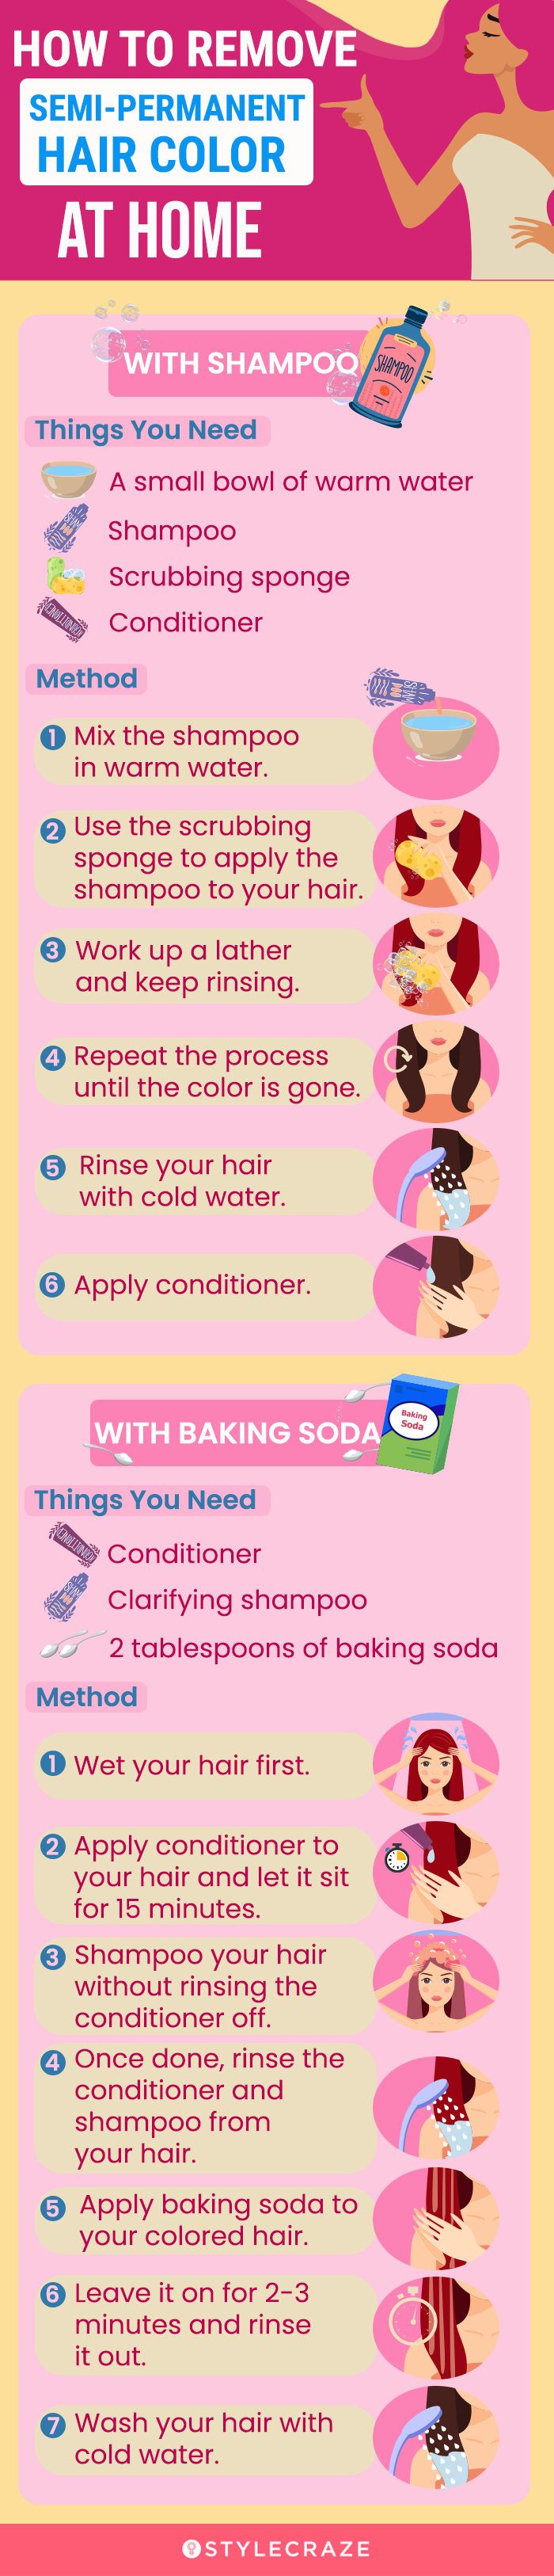 how to remove semi permanent hair color at home [infographic]